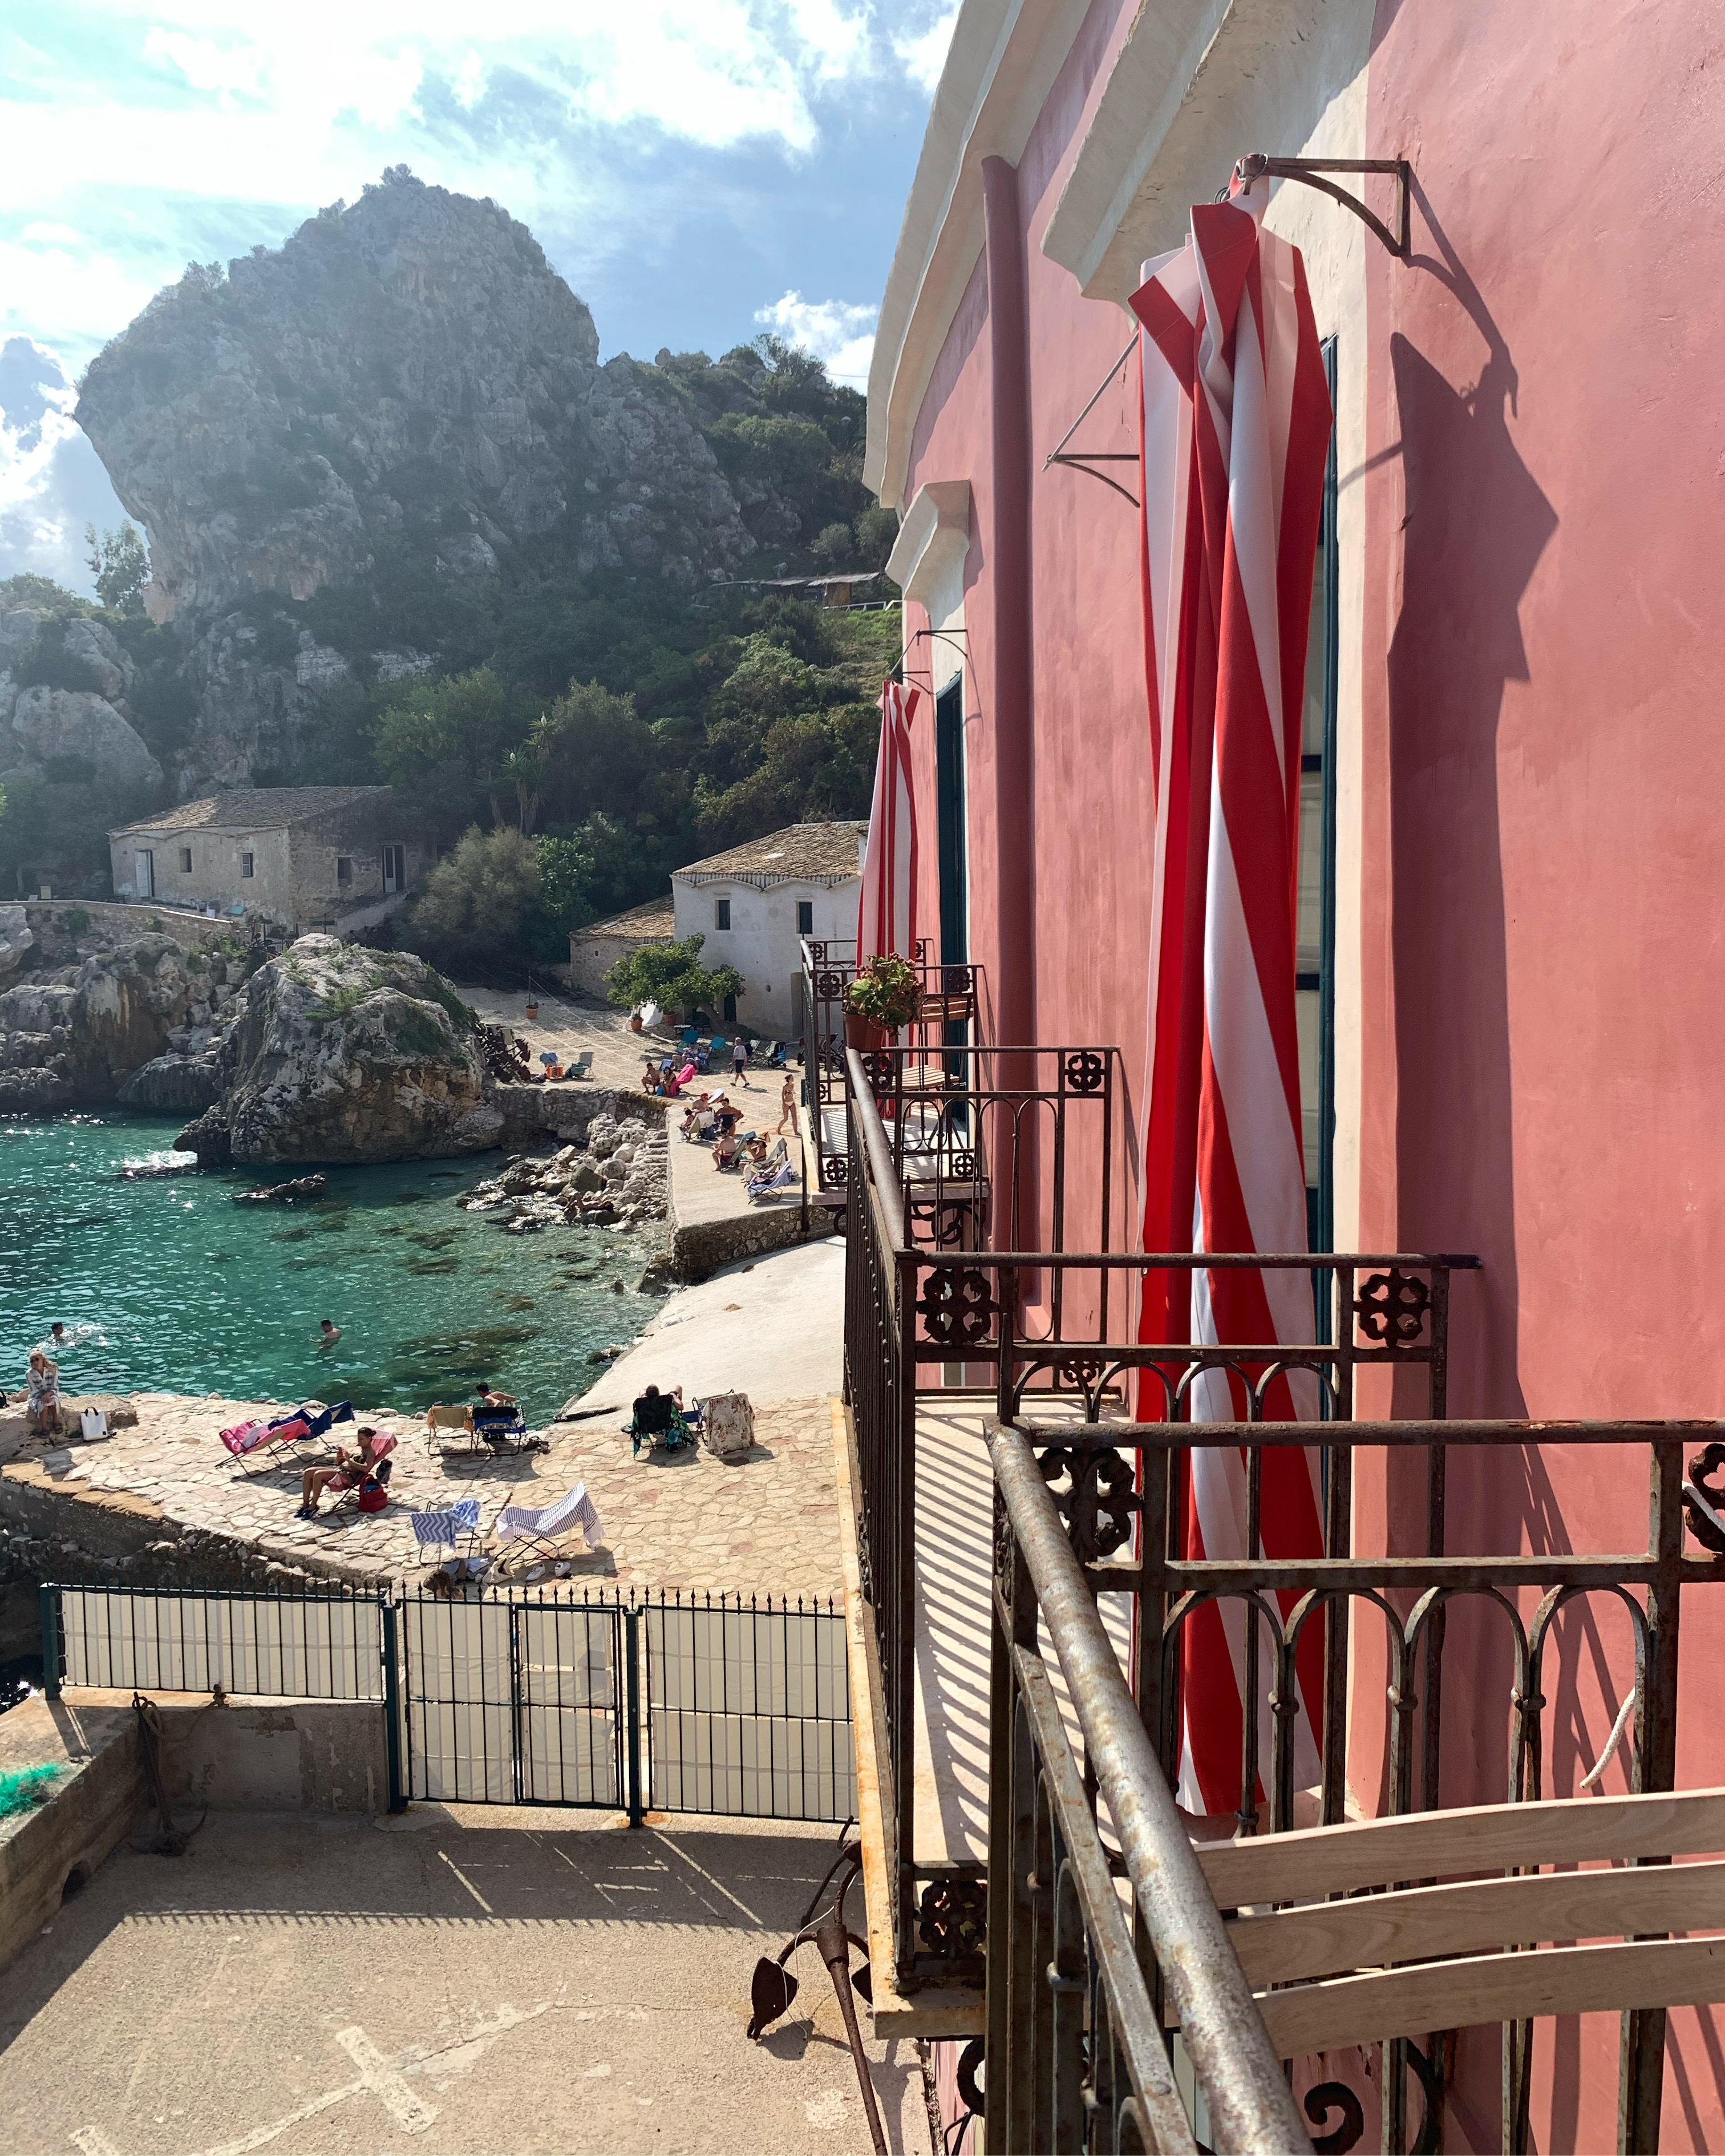 Here you can see how Tonnara di Scopello is gated from the public area of the bay